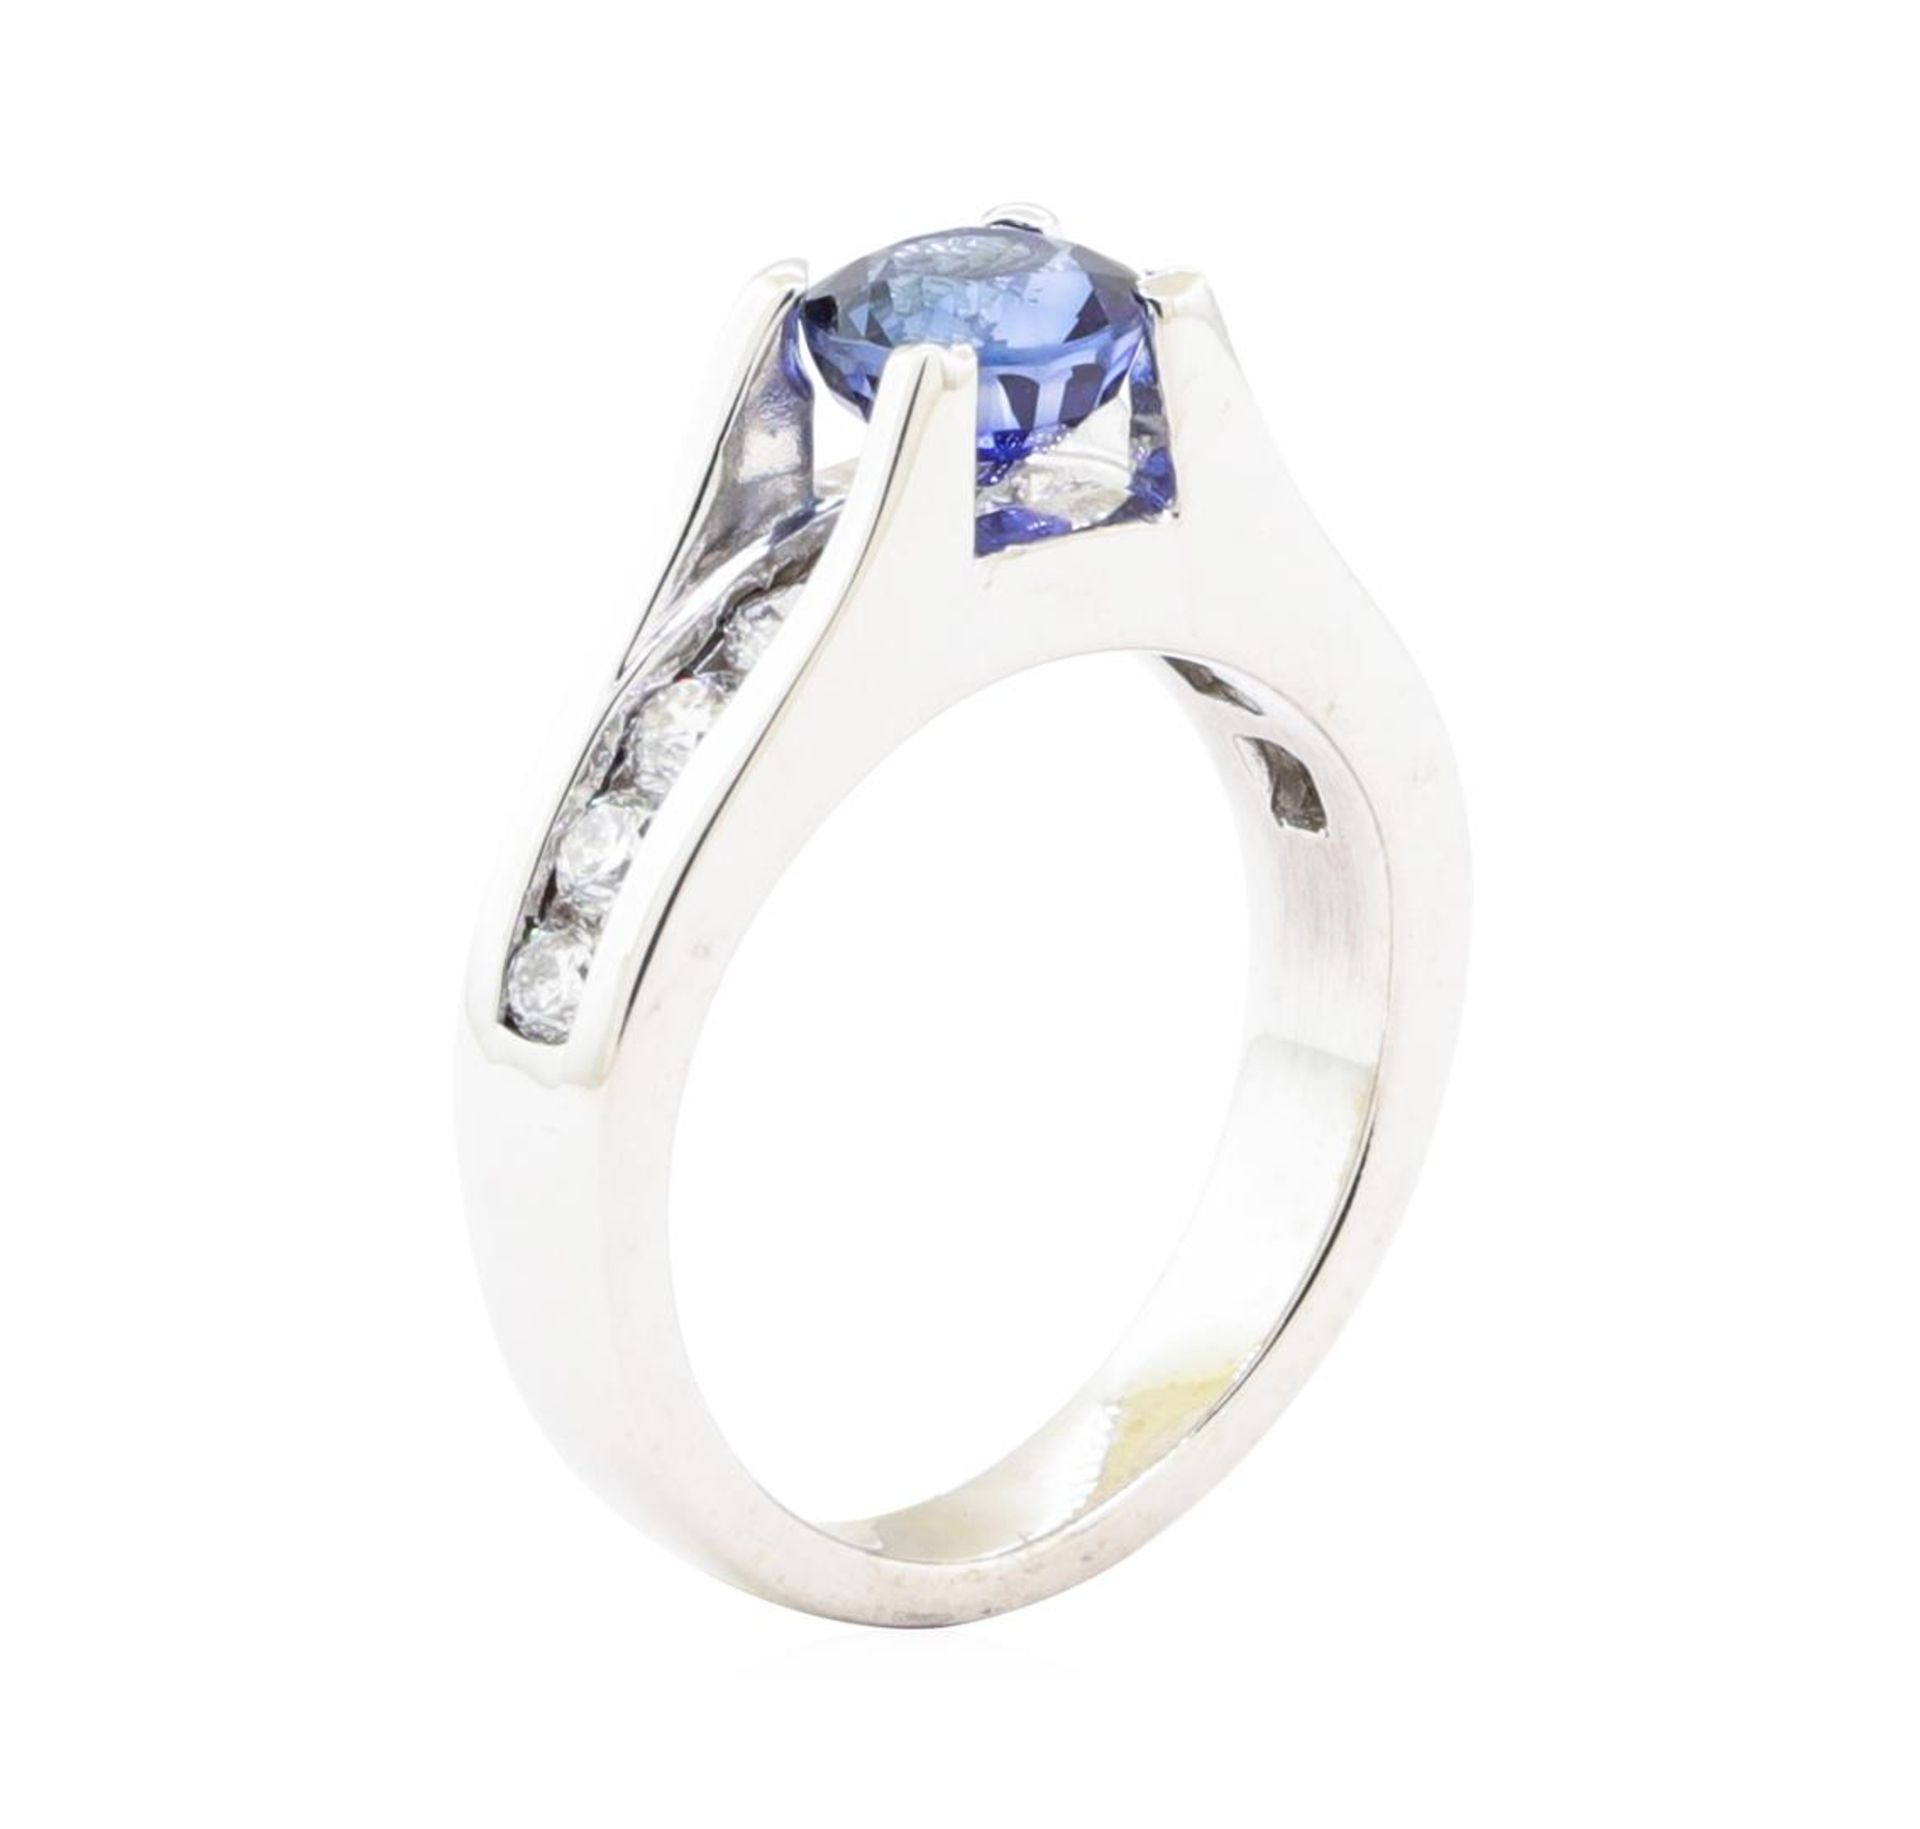 2.05ctw Sapphire and Diamond Ring - 14KT White Gold - Image 4 of 4